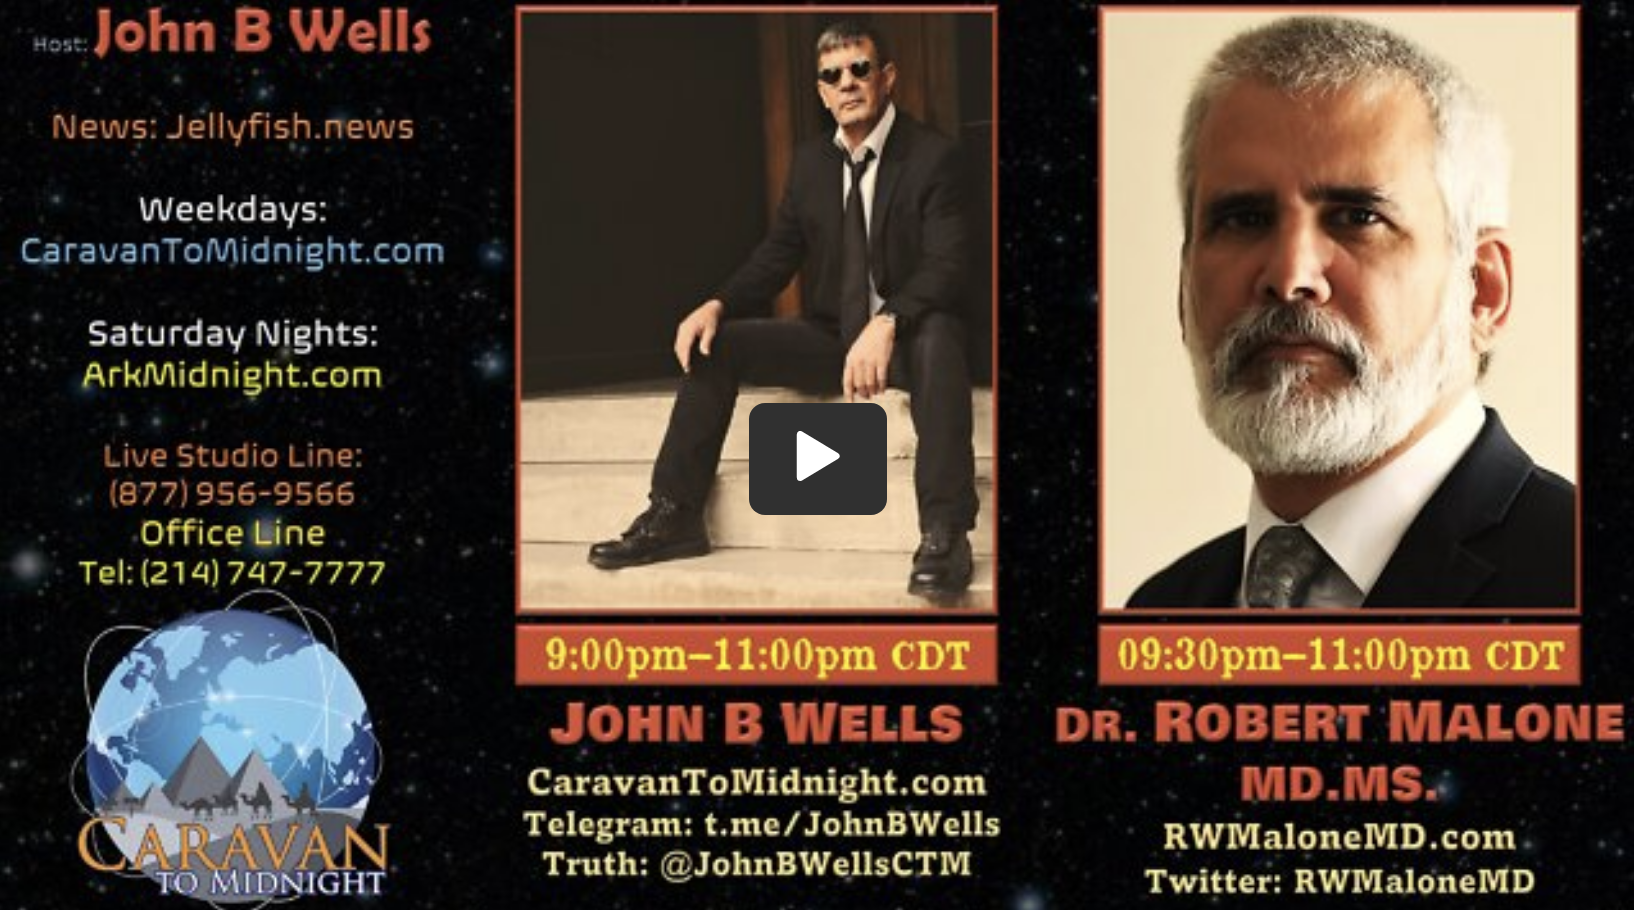 Screen shot of thumbnail for Caravan to Midnight video interview with Dr. Robert Malone and John B Wells